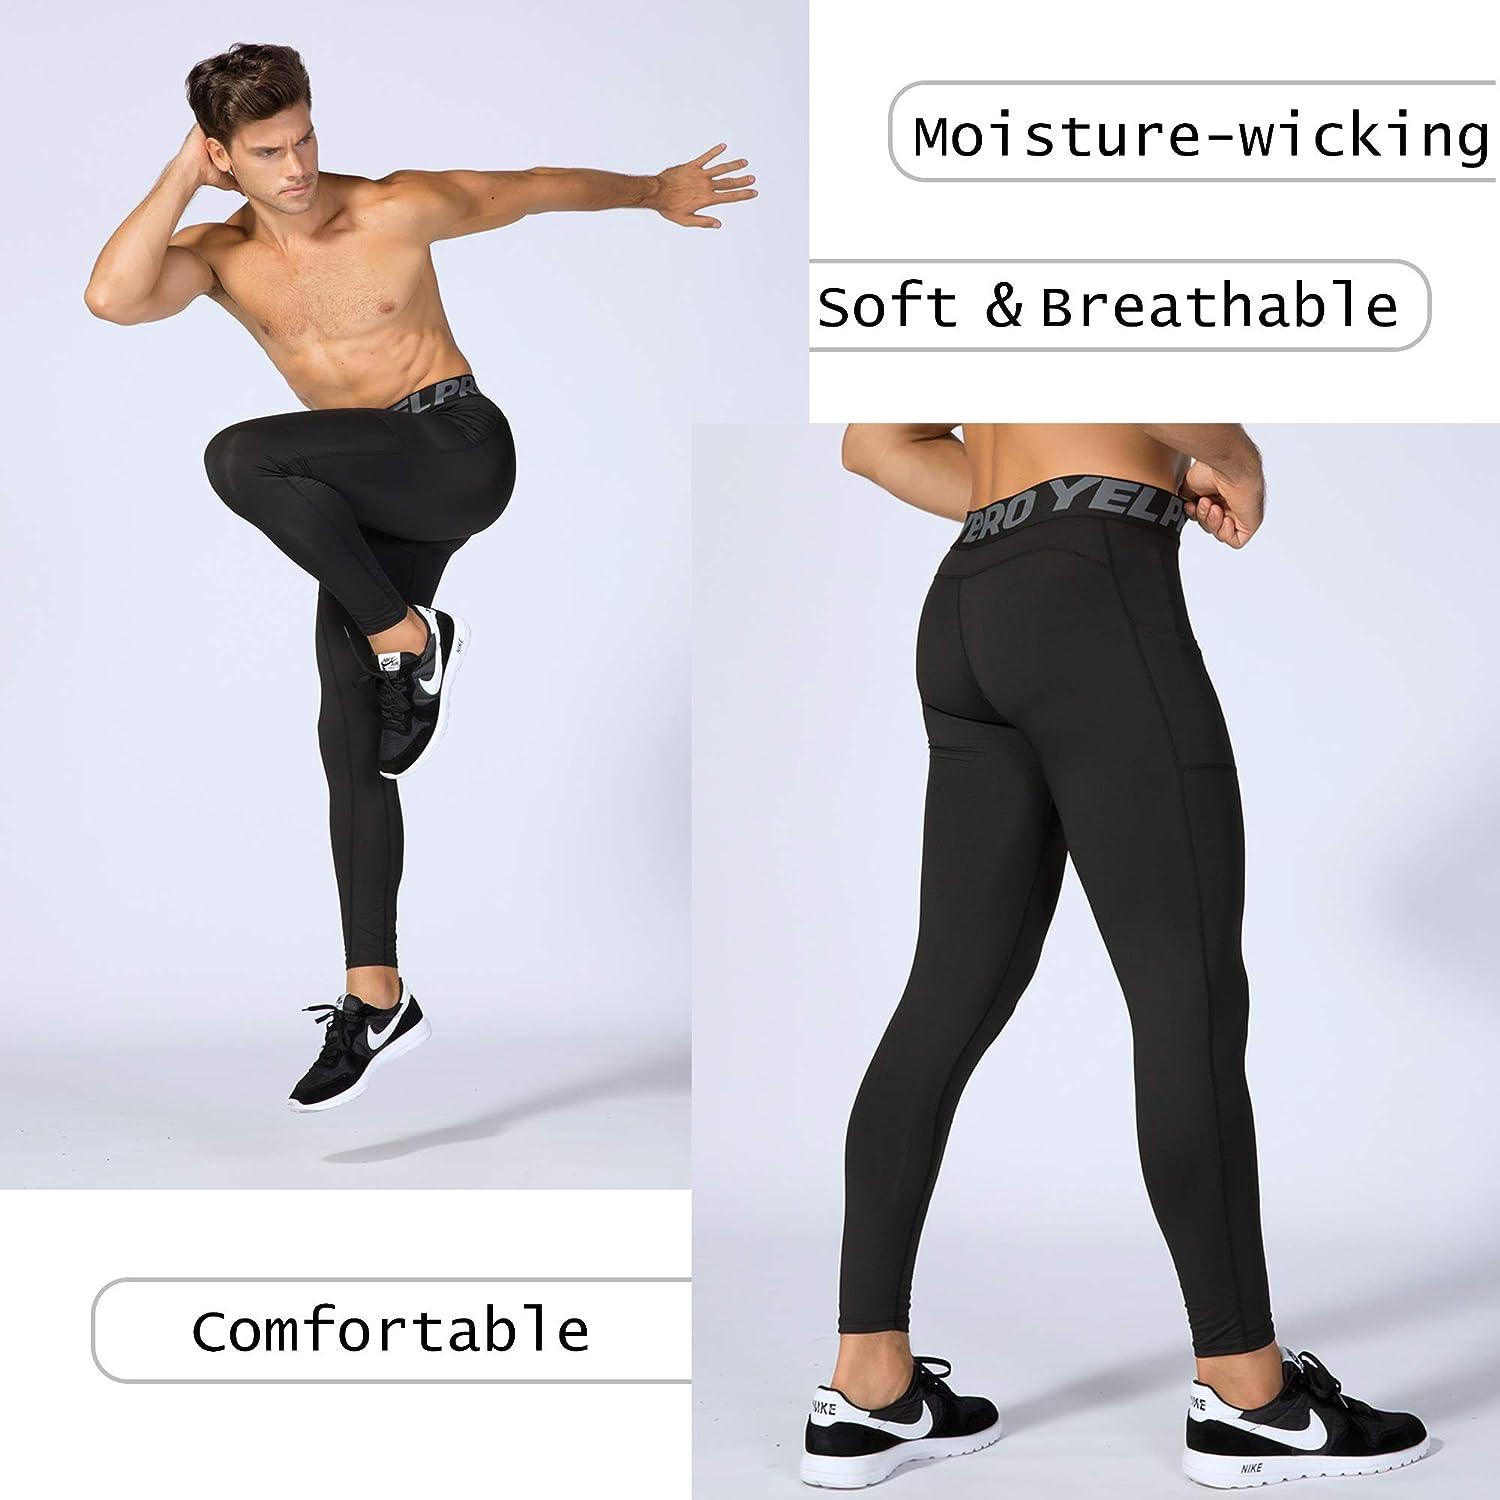 Products  Mens tights, Sportswear leggings, Compression tights